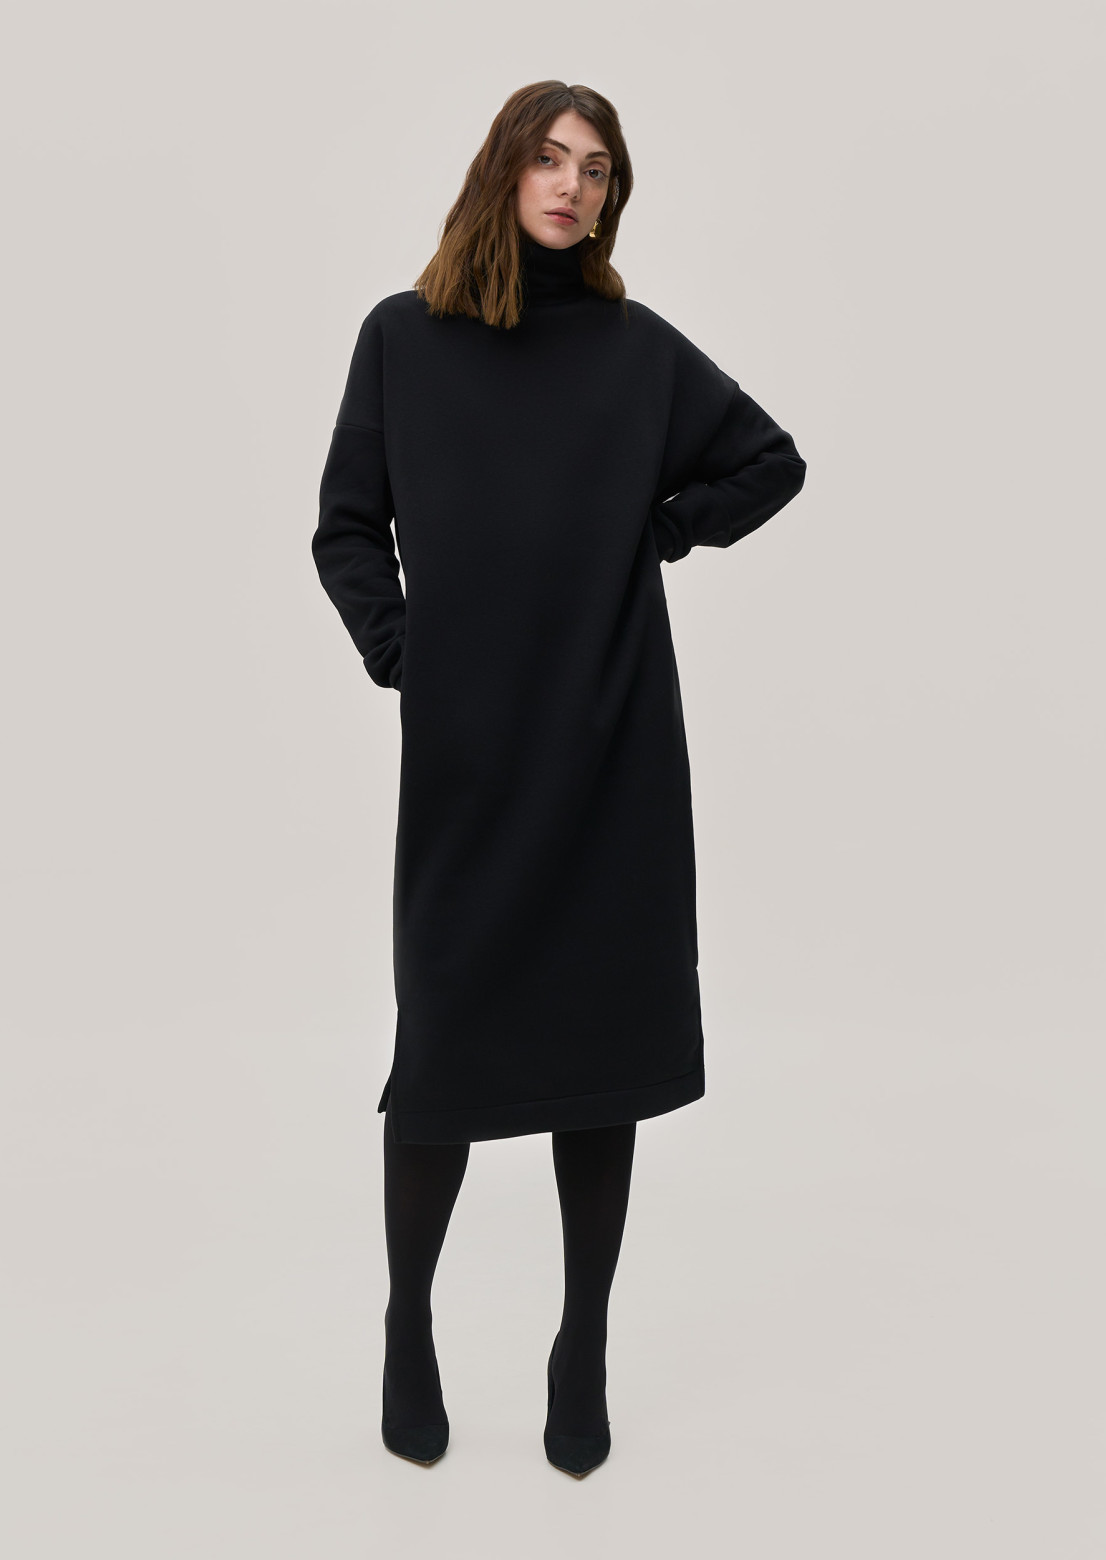 Black color three-thread insulated dress-sweatshirt with a neck